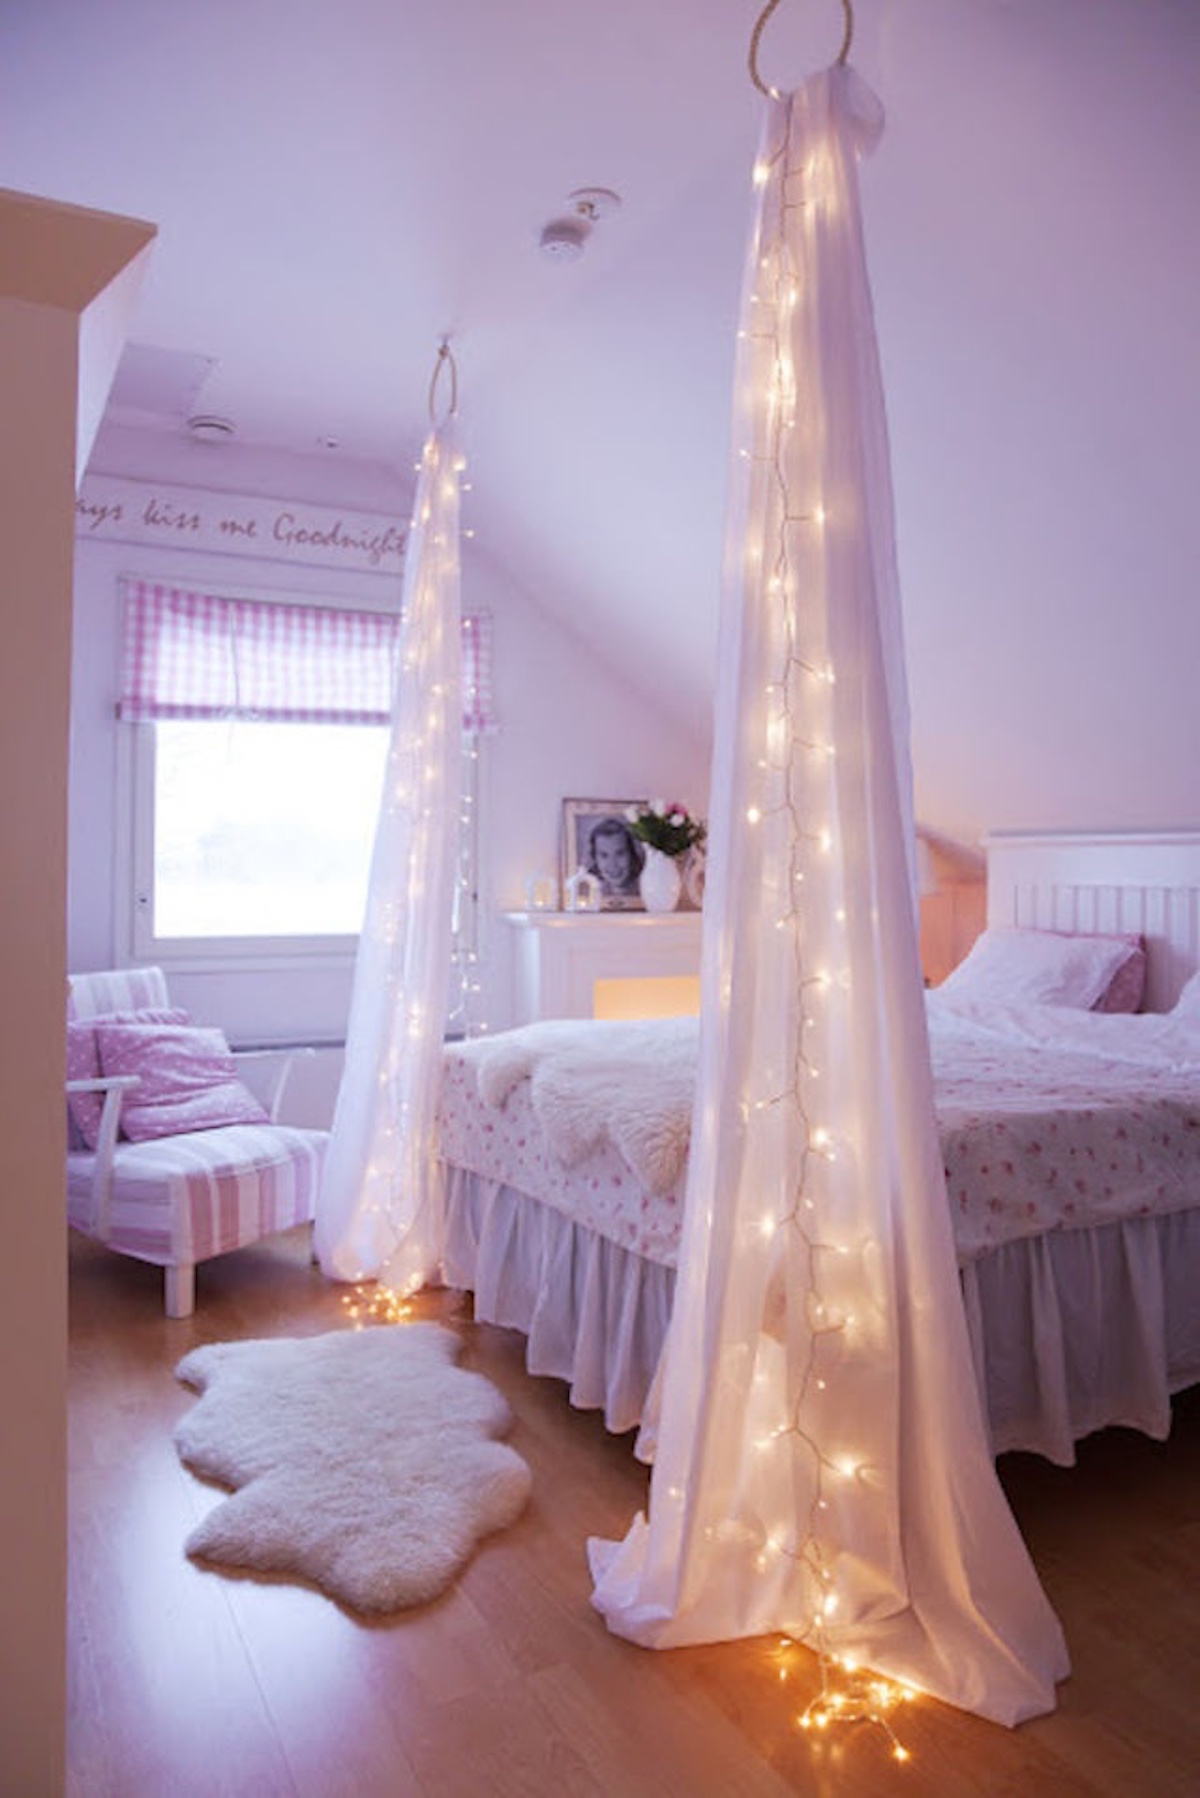 Cheap String Lights Decor For Making Your Bedroom Cozy - Page 2 of 2